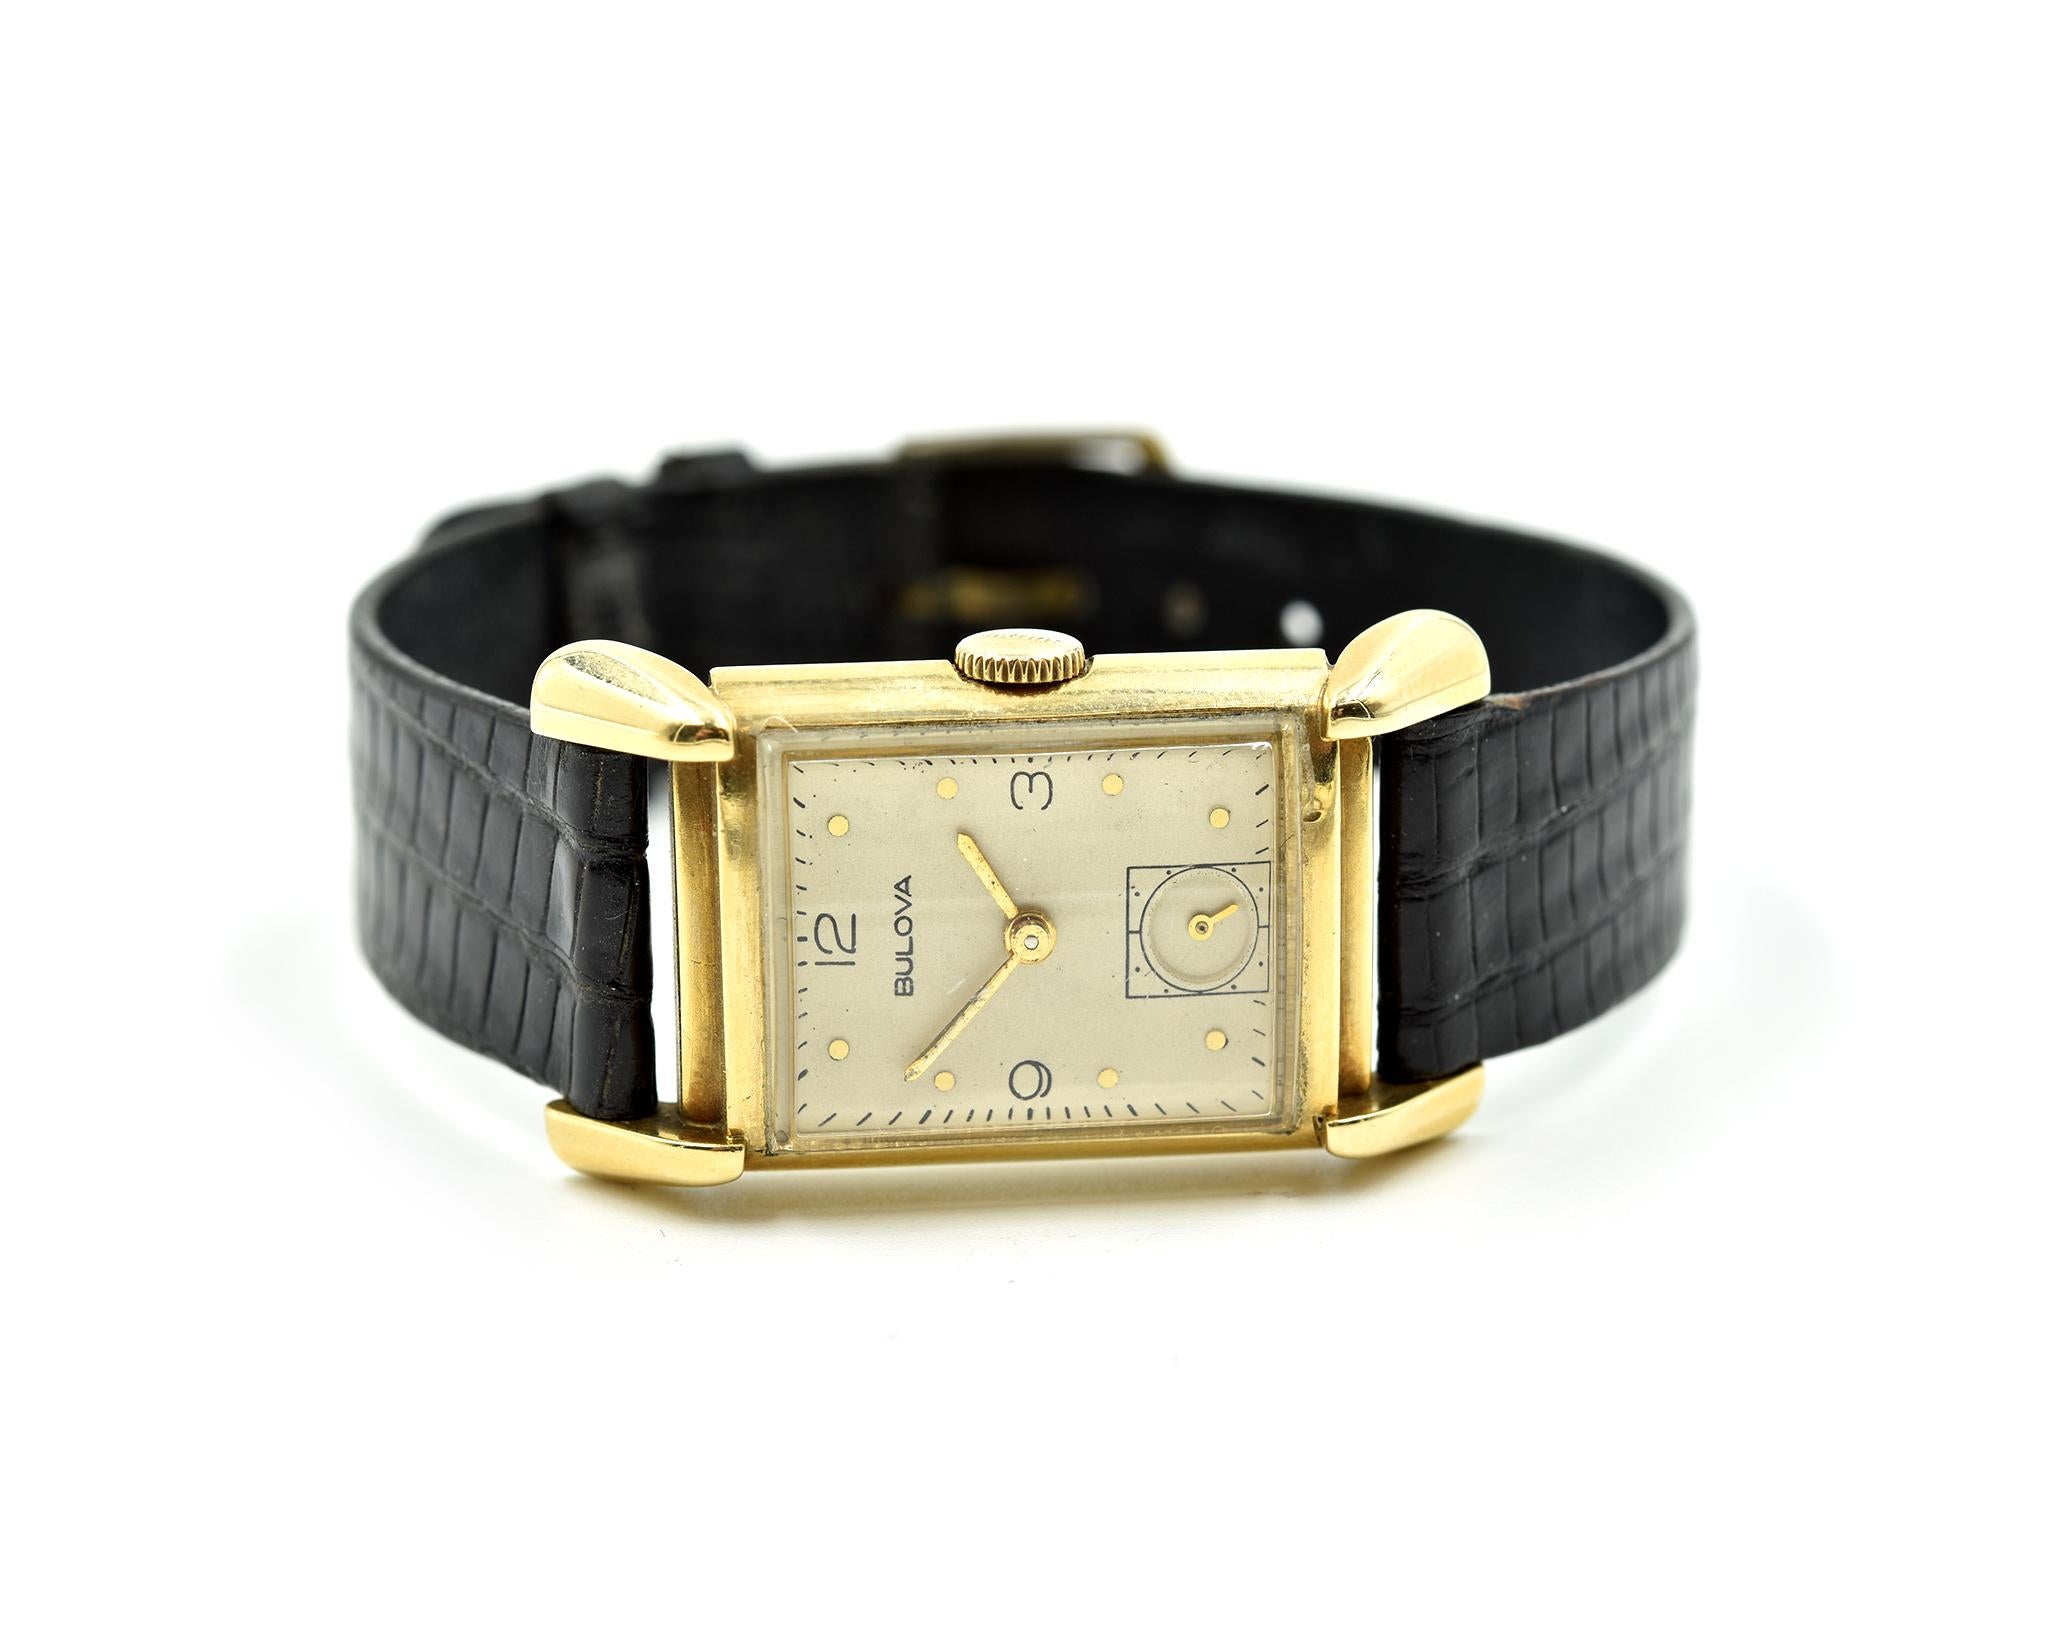 Movement: manual wind  
Function: hours, minutes, sub seconds
Case: 24x20mm 14k yellow gold case, acrylic crystal
Band: generic black leather strap, gold tone tang buckle
Dial: cream dial, gold hands, gold hour markers
Serial #: 6285XXX
